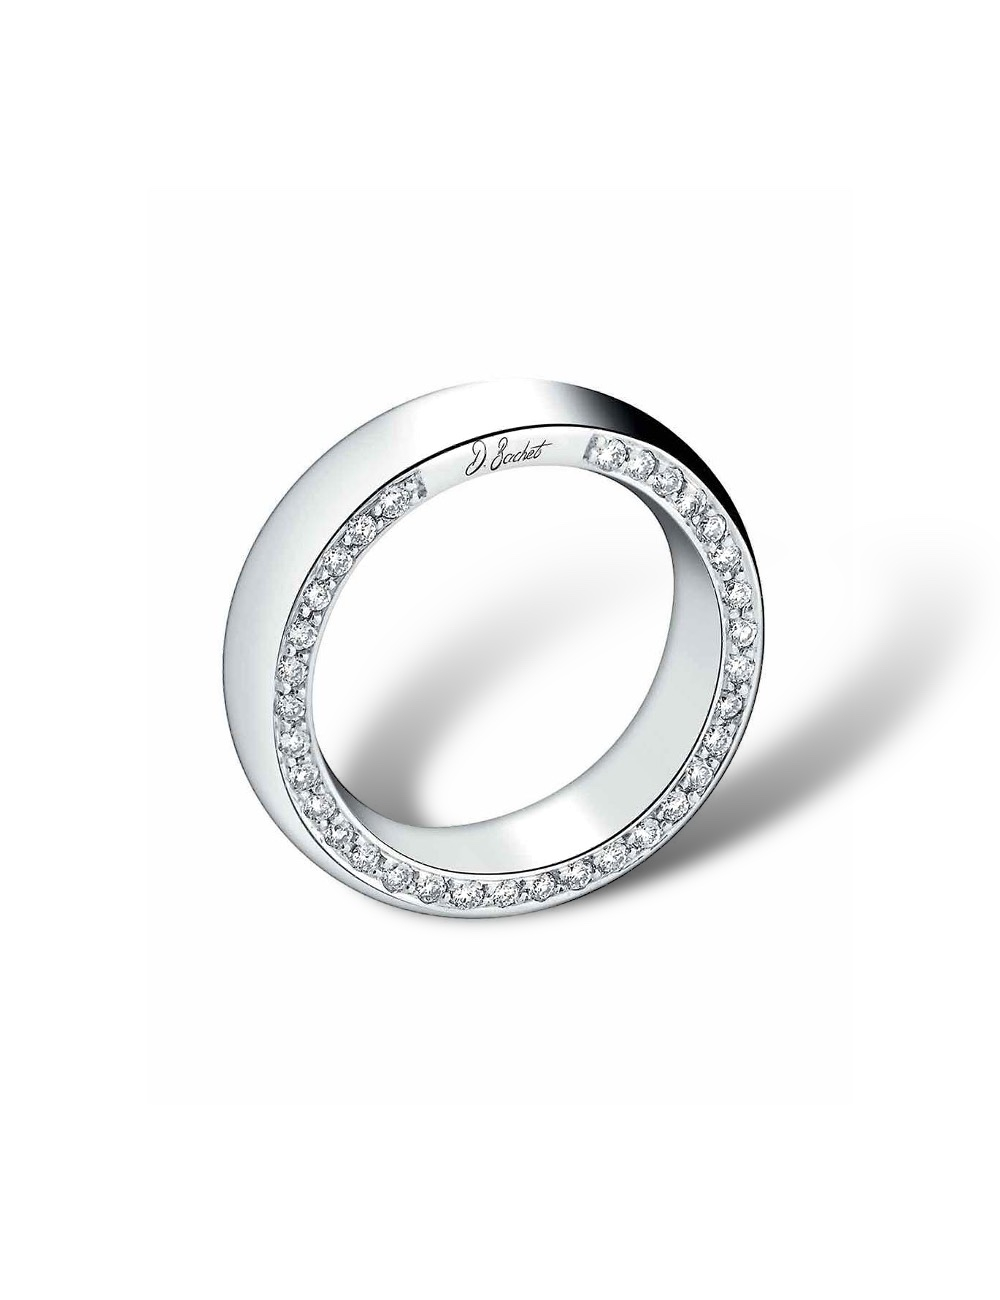 Jewelry creation 'Subtile', platinum ring with the option of diamonds on one or both sides, for men and women.